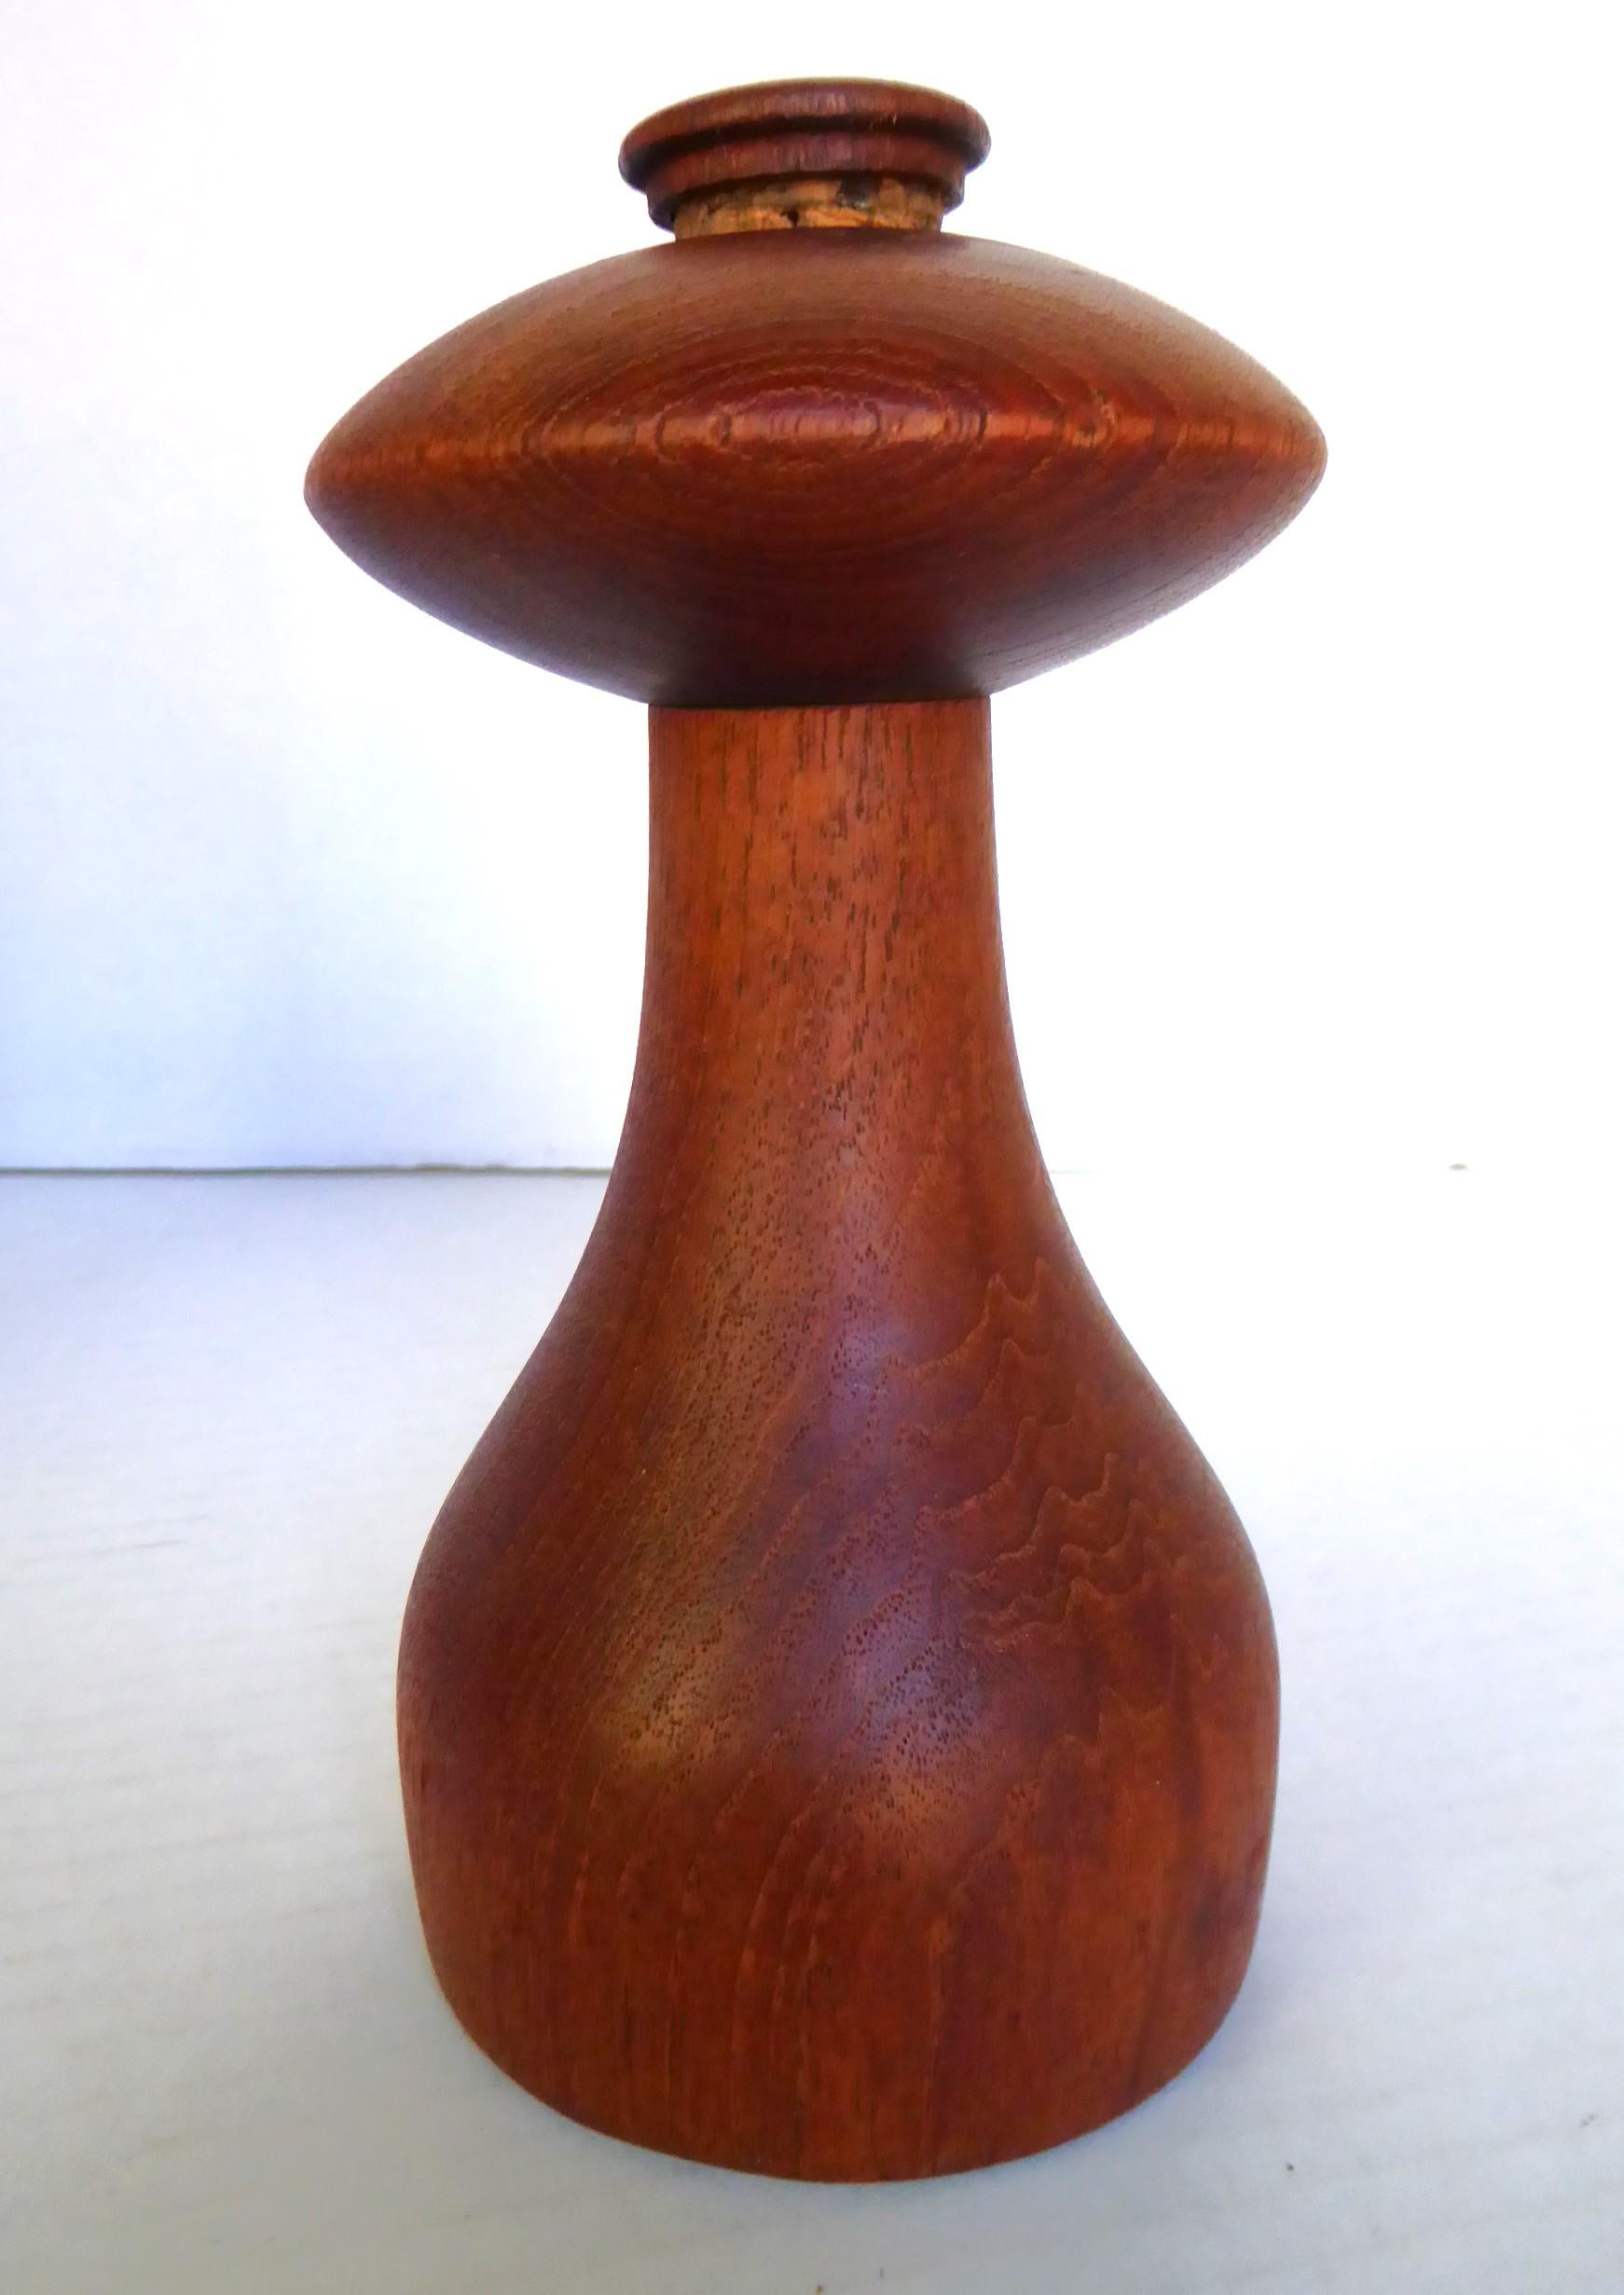 Great Mid-Century Modern teak mushroom shaped peppermill / salt shaker combo by Jens Harald Quistgaard for Dansk Designs. Ground pepper comes out of the bottom when top turns and salt sprinkles from top when placed upside down. Refill for salt is by